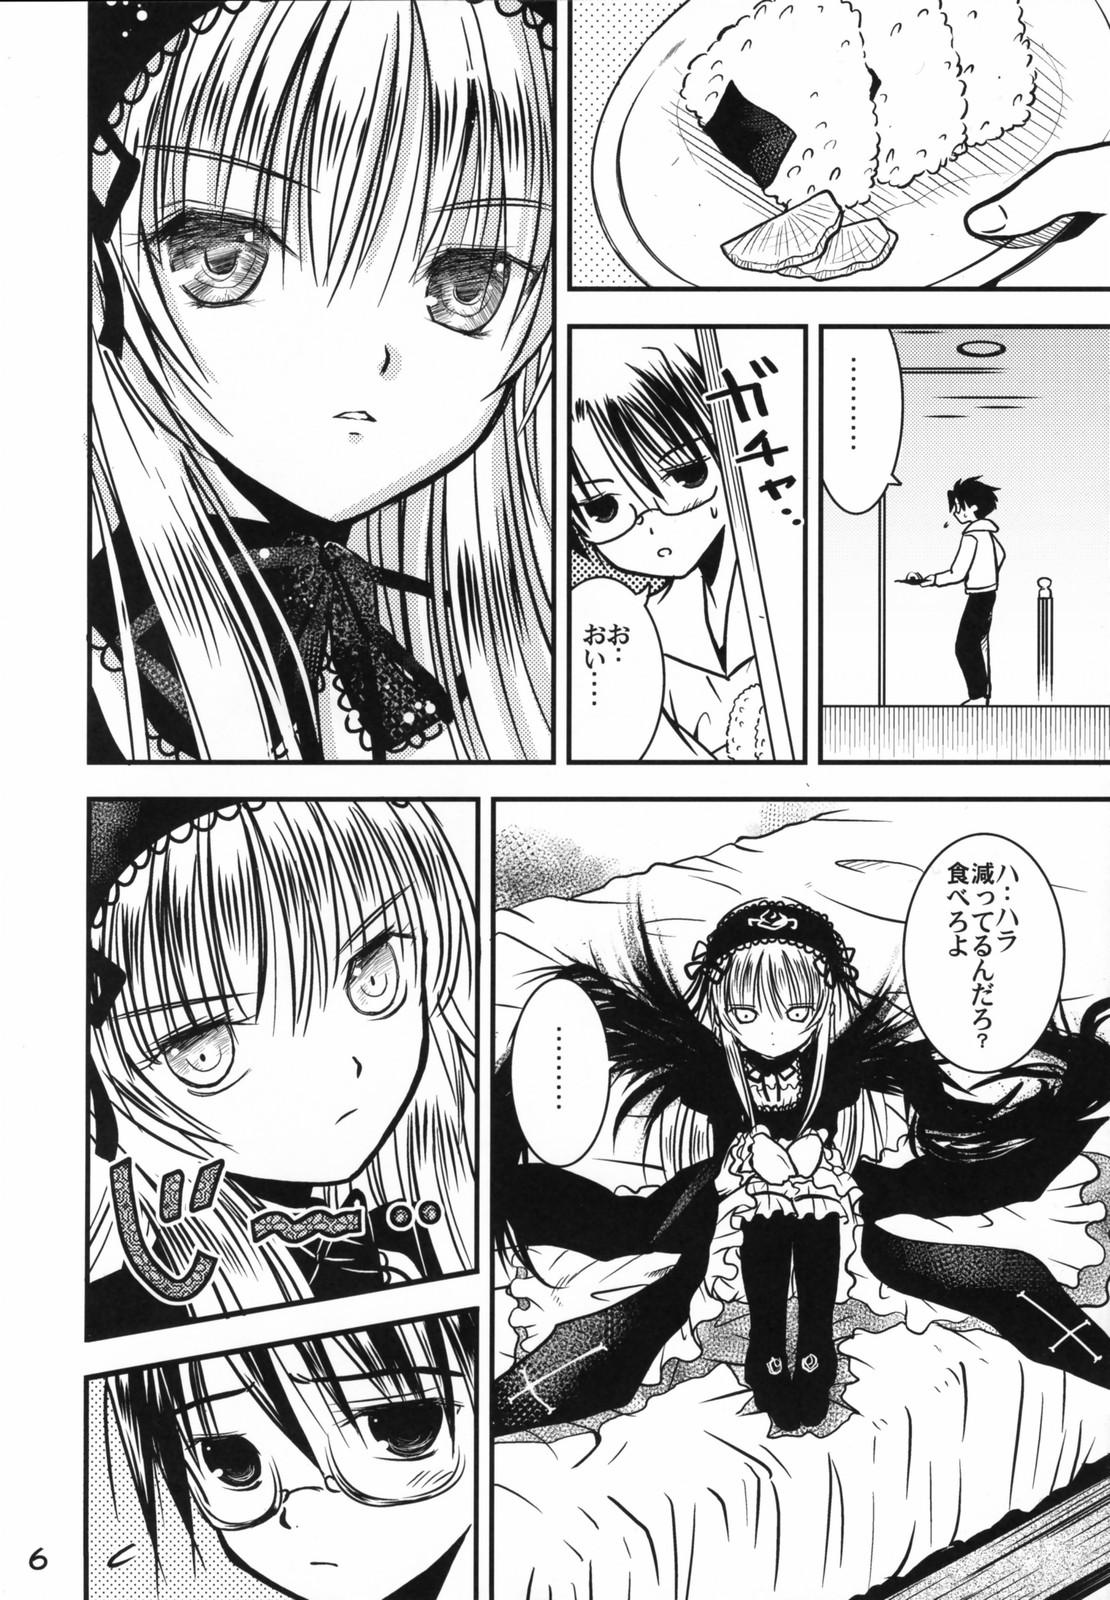 Lick A caprice - Rozen maiden Gay Shop - Page 5